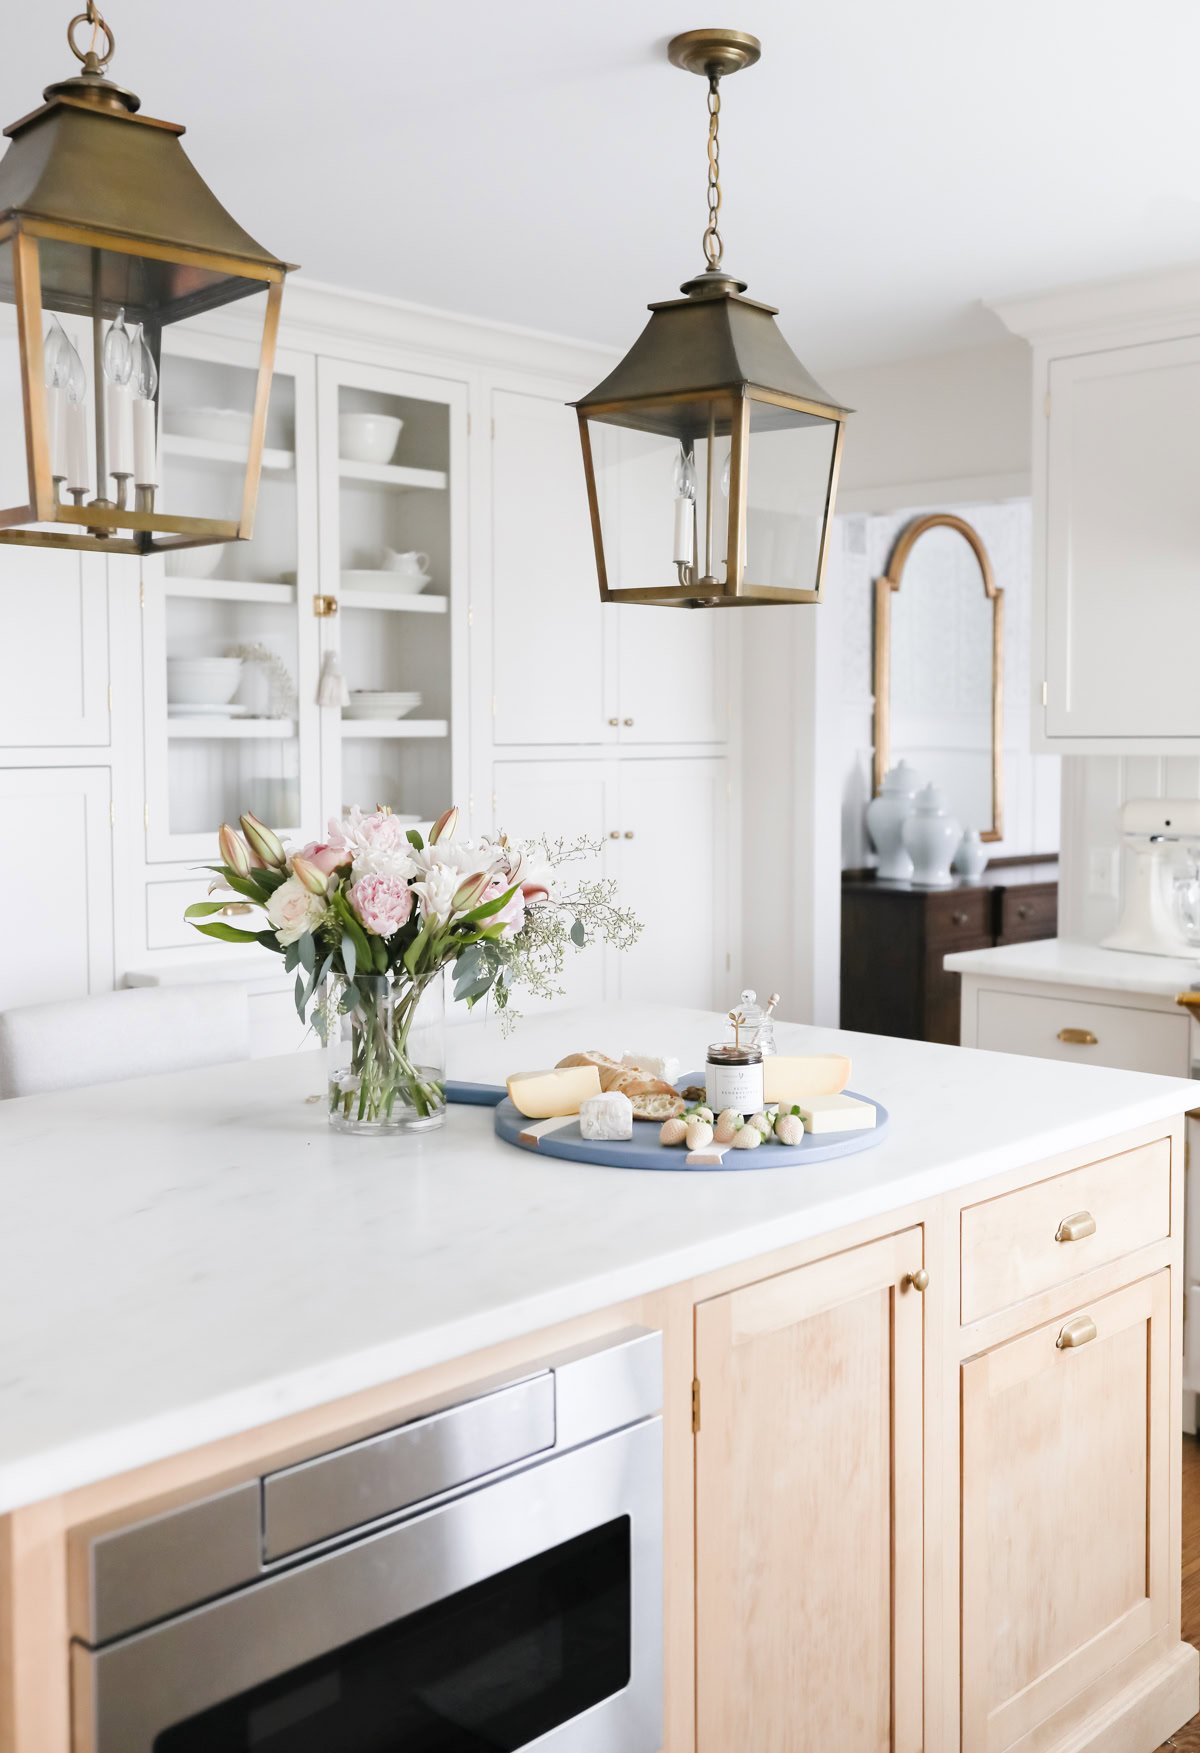 Elegant white kitchen with marble countertops, sophisticated lighting design, and a wooden island with a cheese platter and flowers.